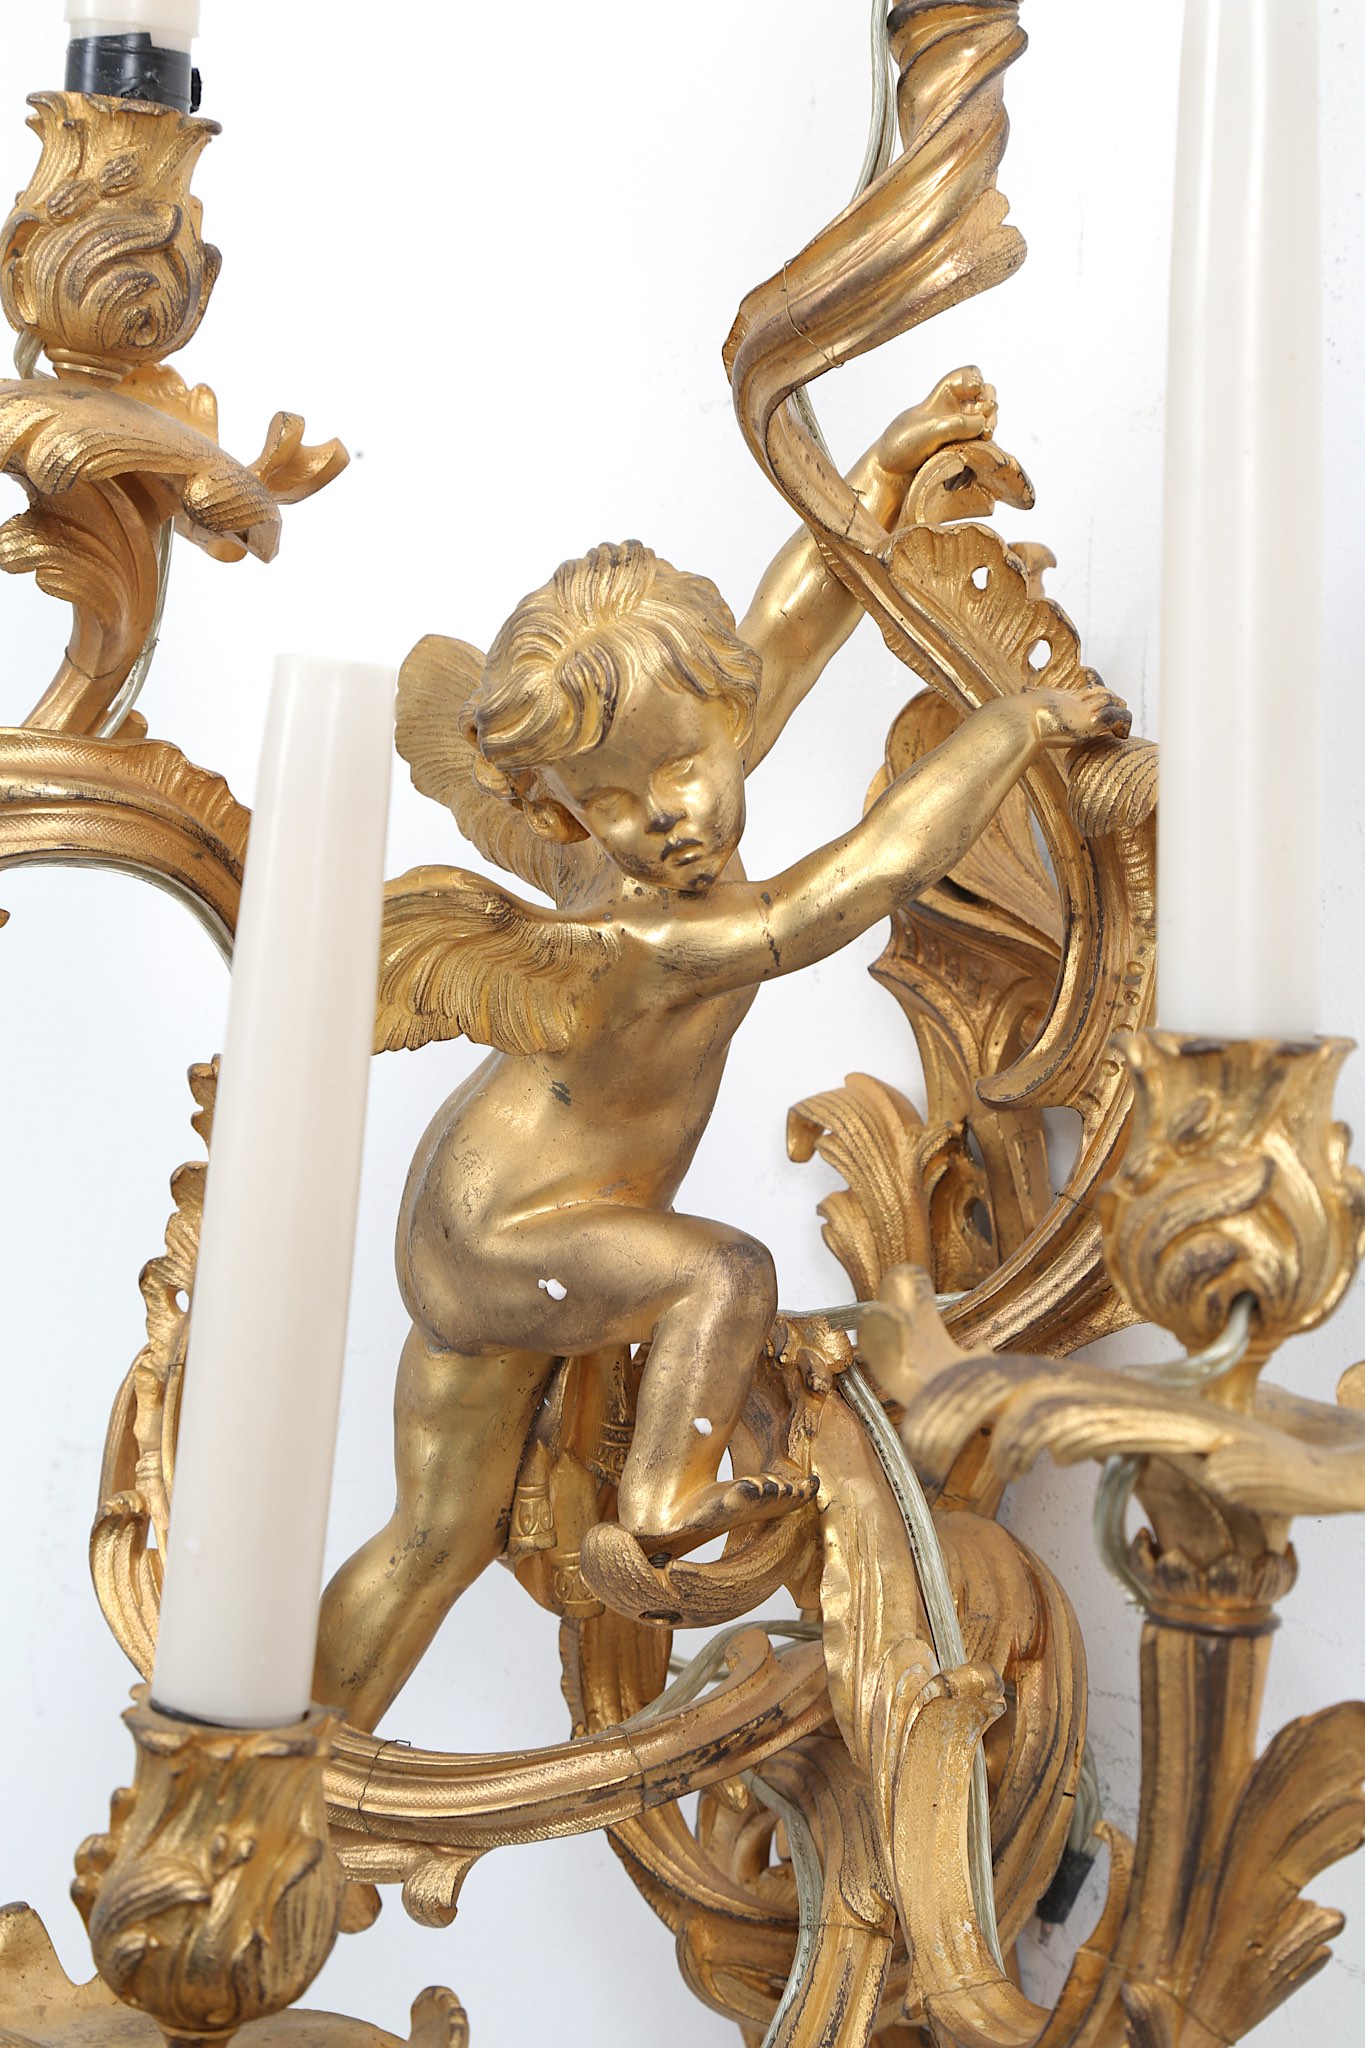 A LARGE AND IMPRESSIVE PAIR OF 19TH CENTURY FRENCH GILT BRONZE FIGURAL WALL LIGHTS IN THE ROCOCO - Image 6 of 7